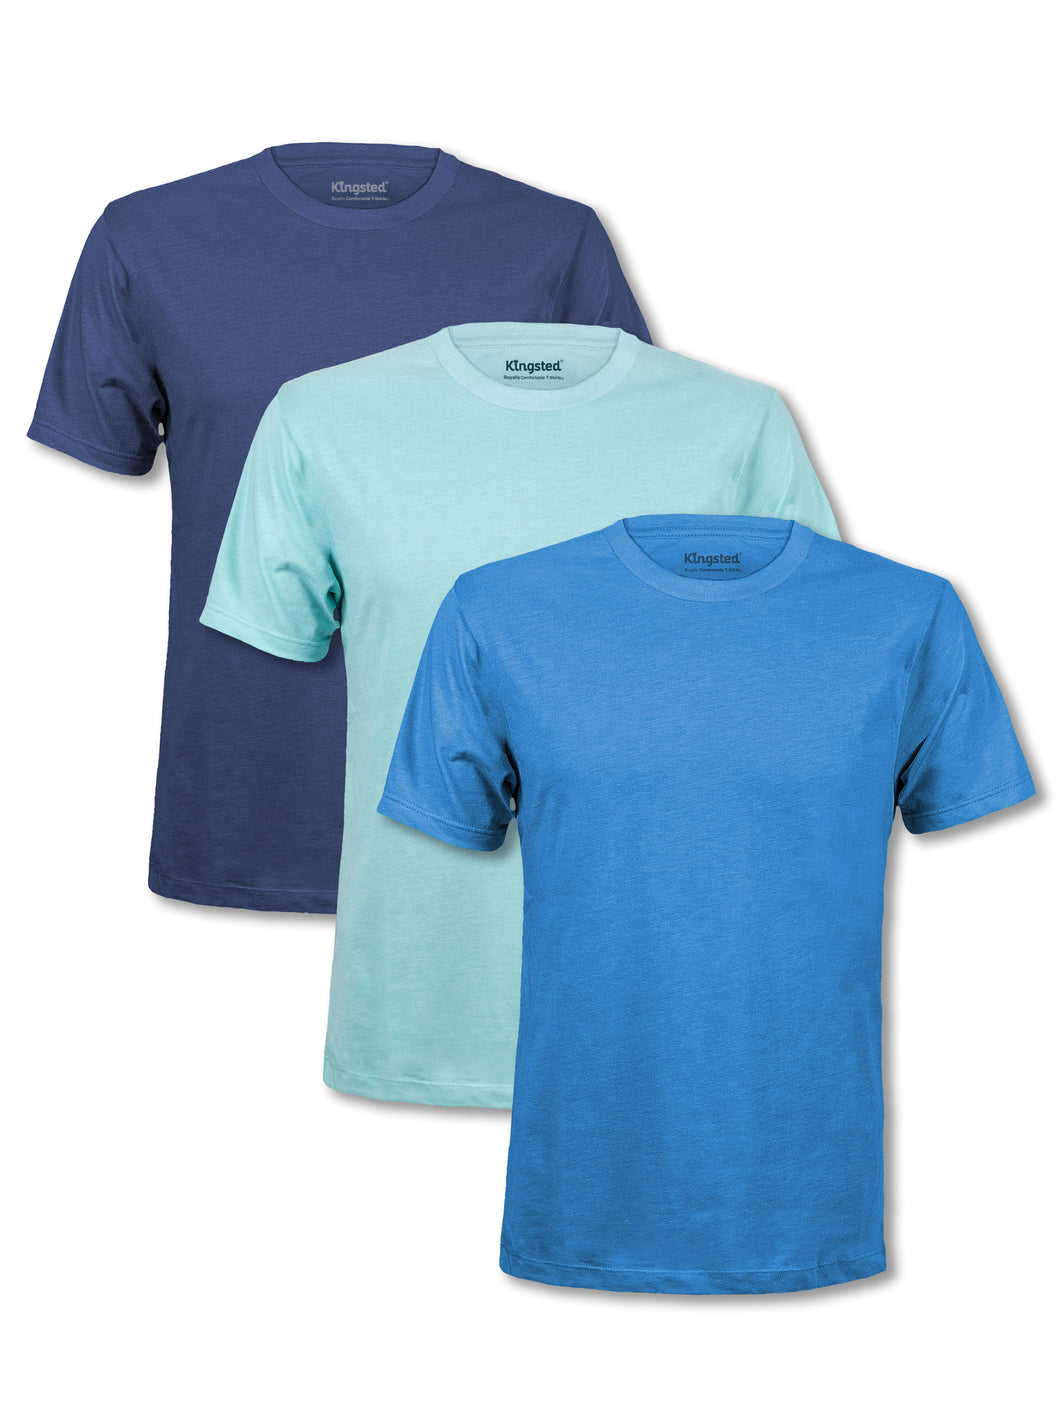 COOL - T-Shirt 3-Pack (NAVY, ROYAL & TURQUOISE)